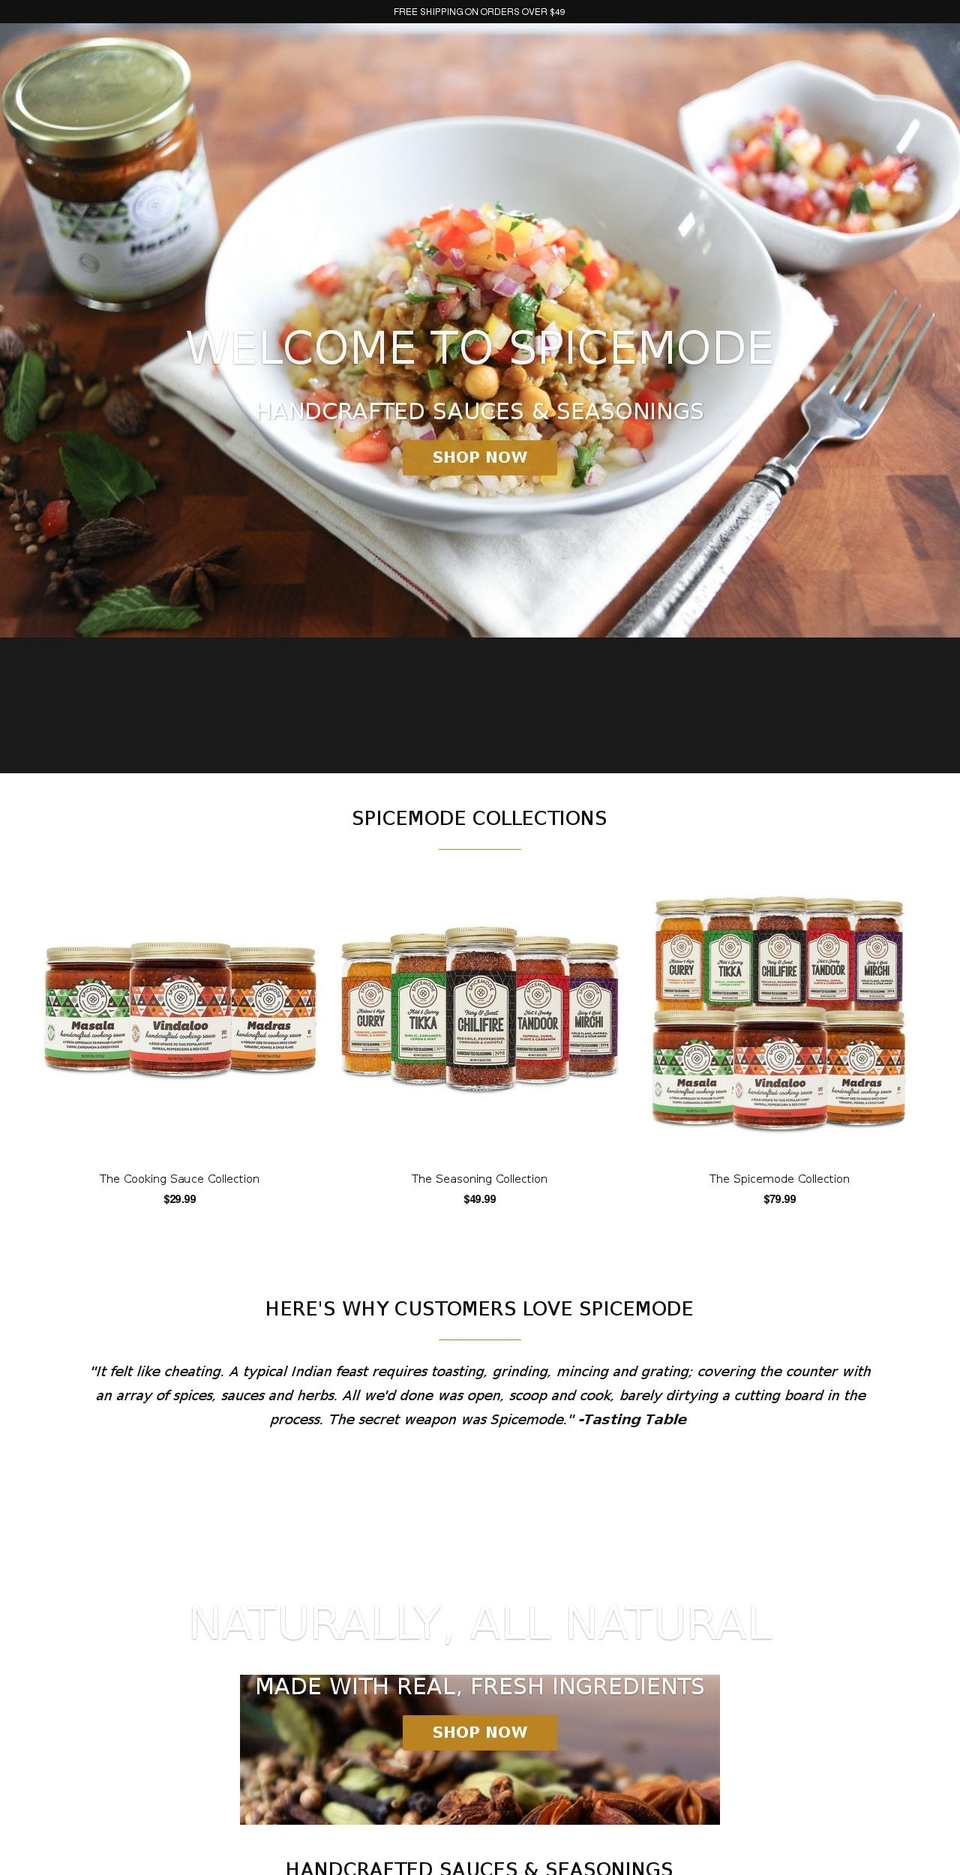 Impact Shopify theme site example spicemode.co